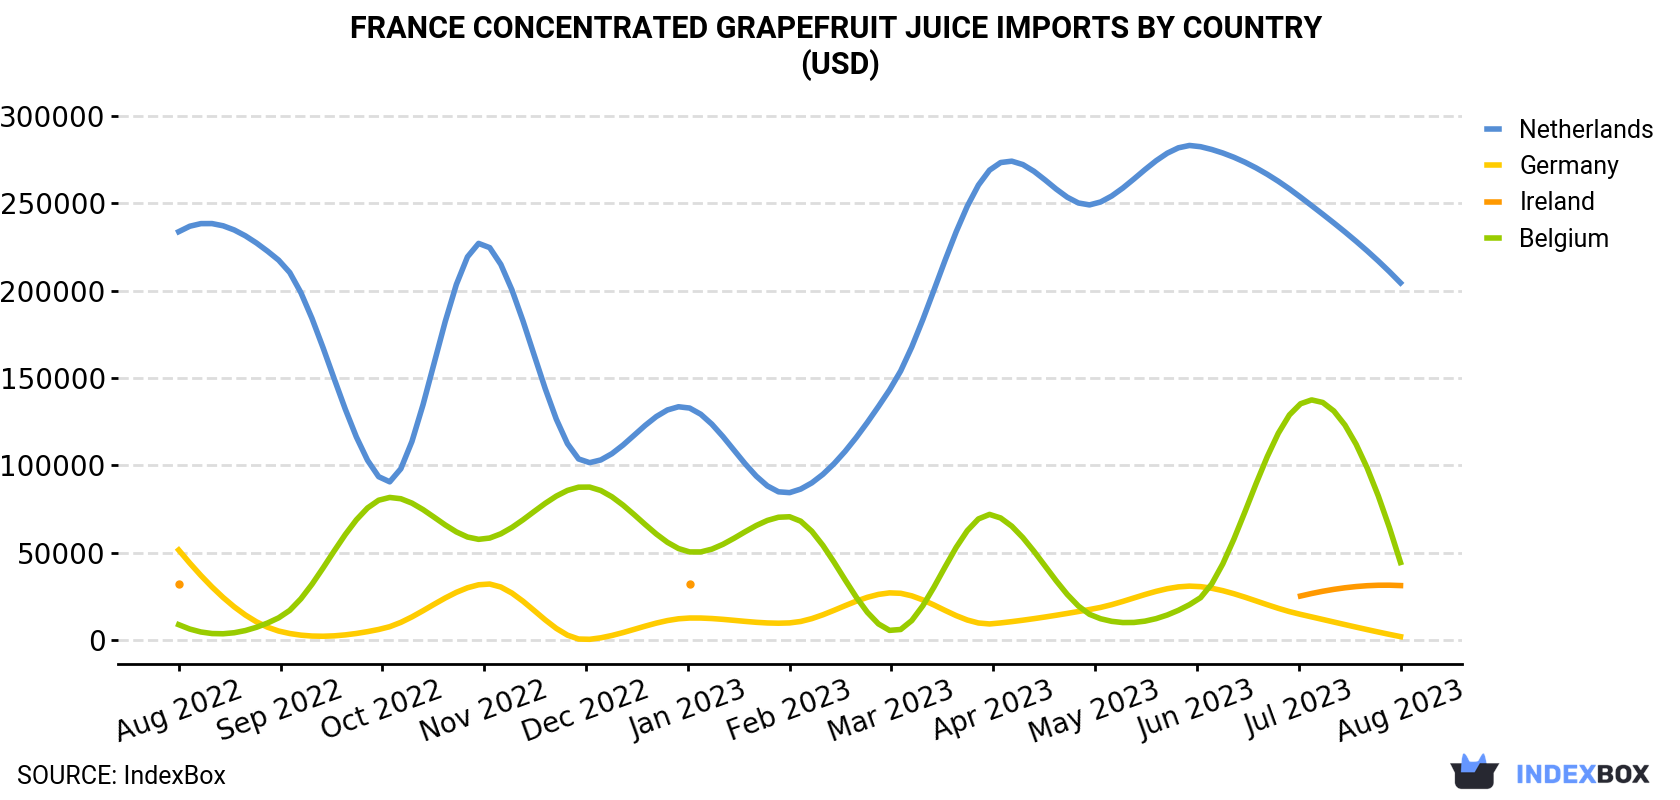 France Concentrated Grapefruit Juice Imports By Country (USD)